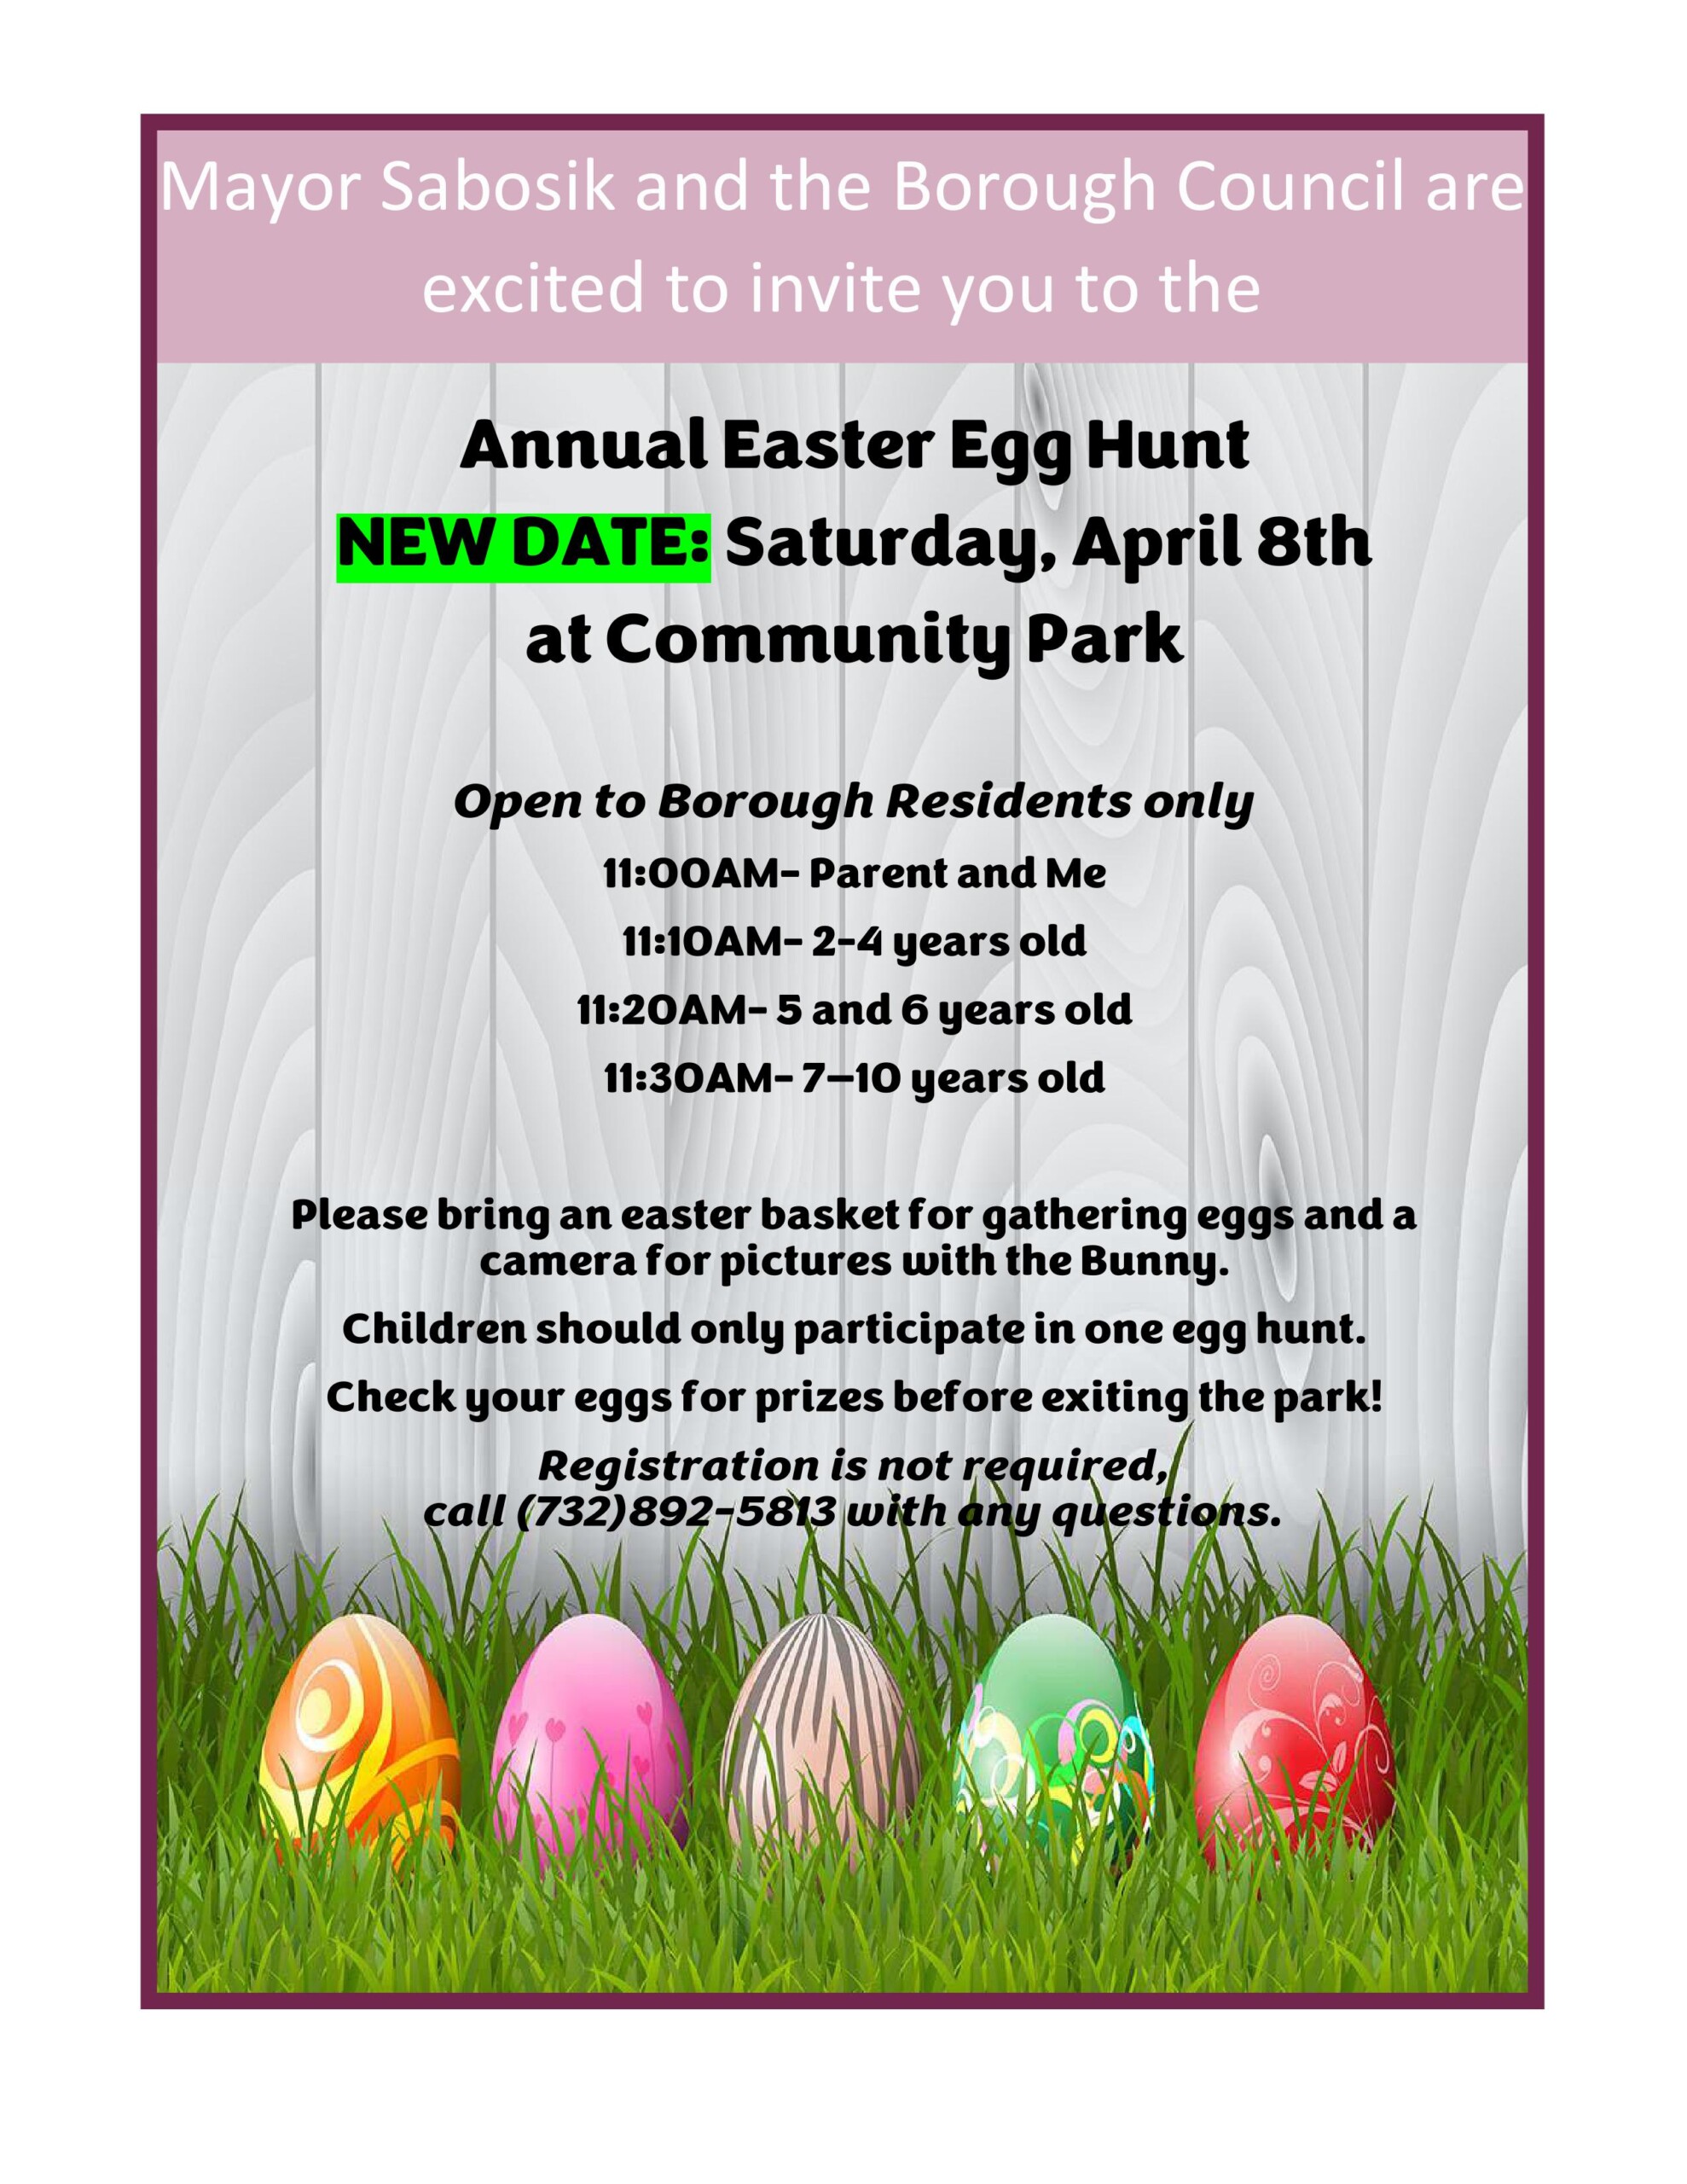 Easter Egg Hunt Scheduled for Saturday, April 8 - Borough of Point Pleasant